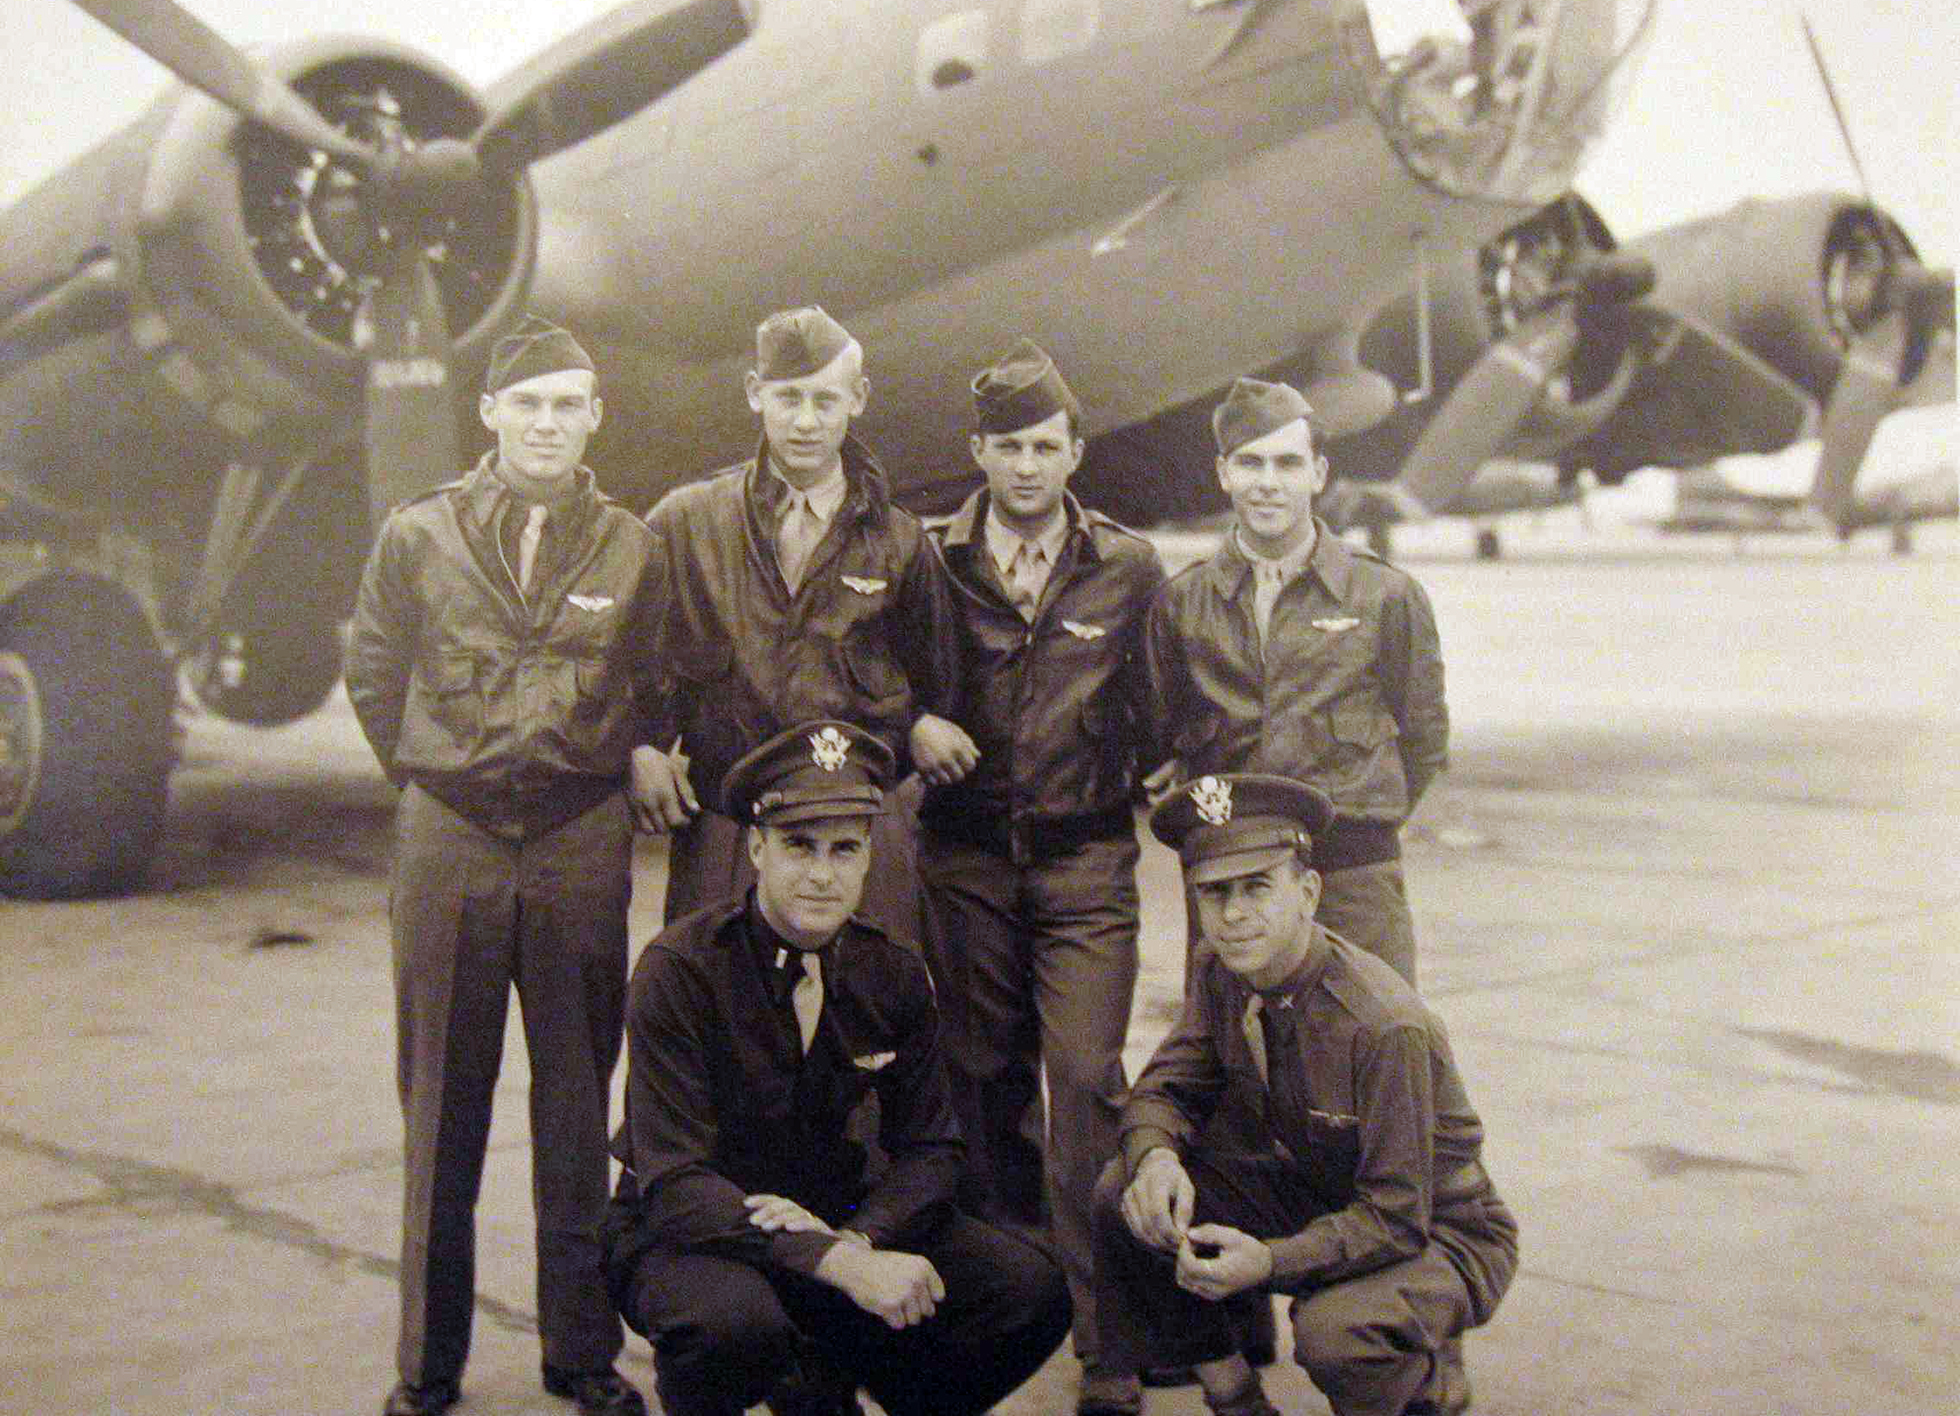 Six men who are a crew for a World War II bomber pose for a photo